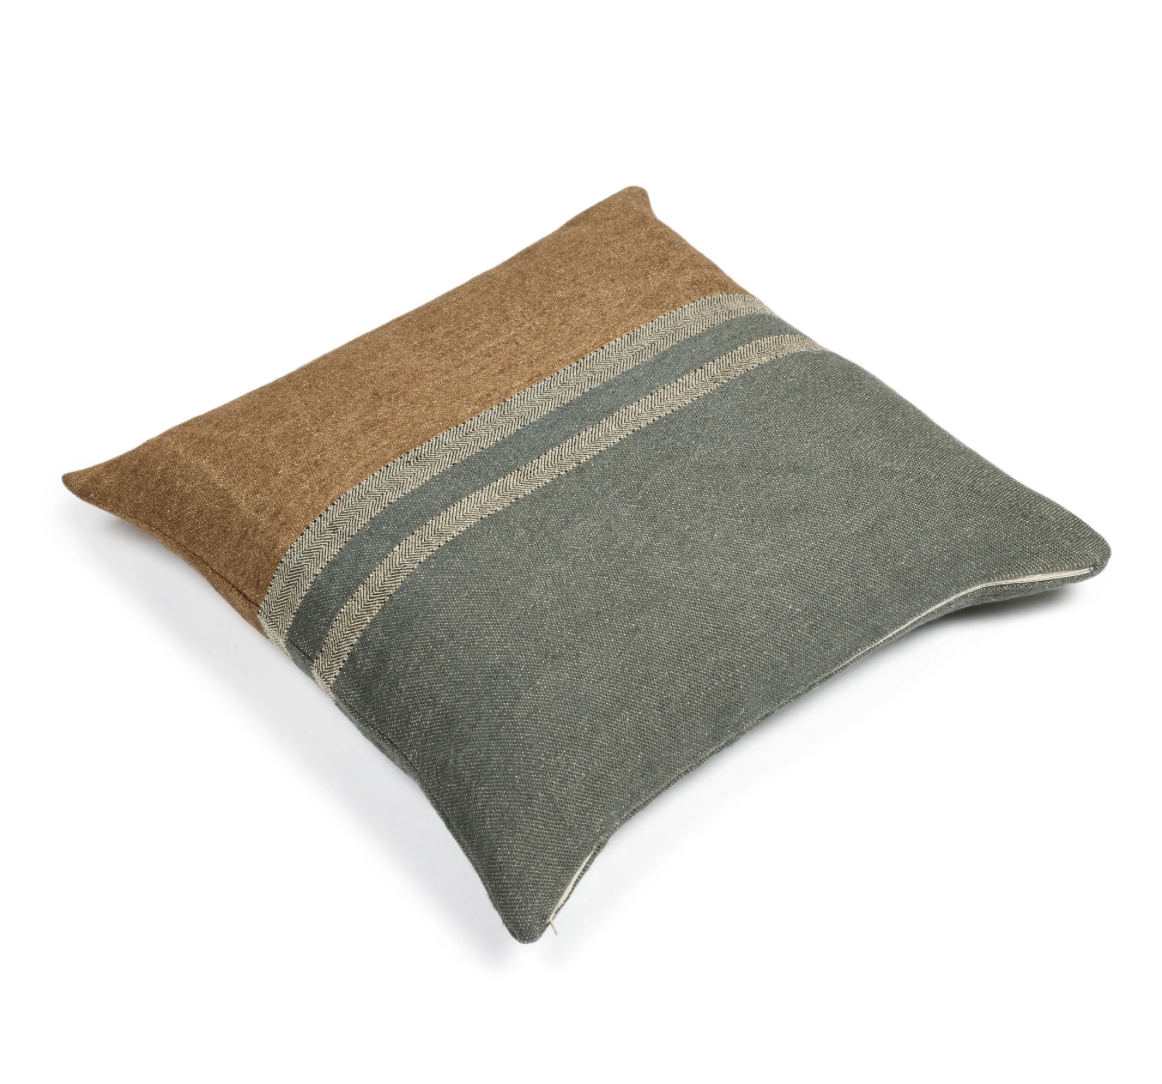 Alouette pillow cover by Libeco